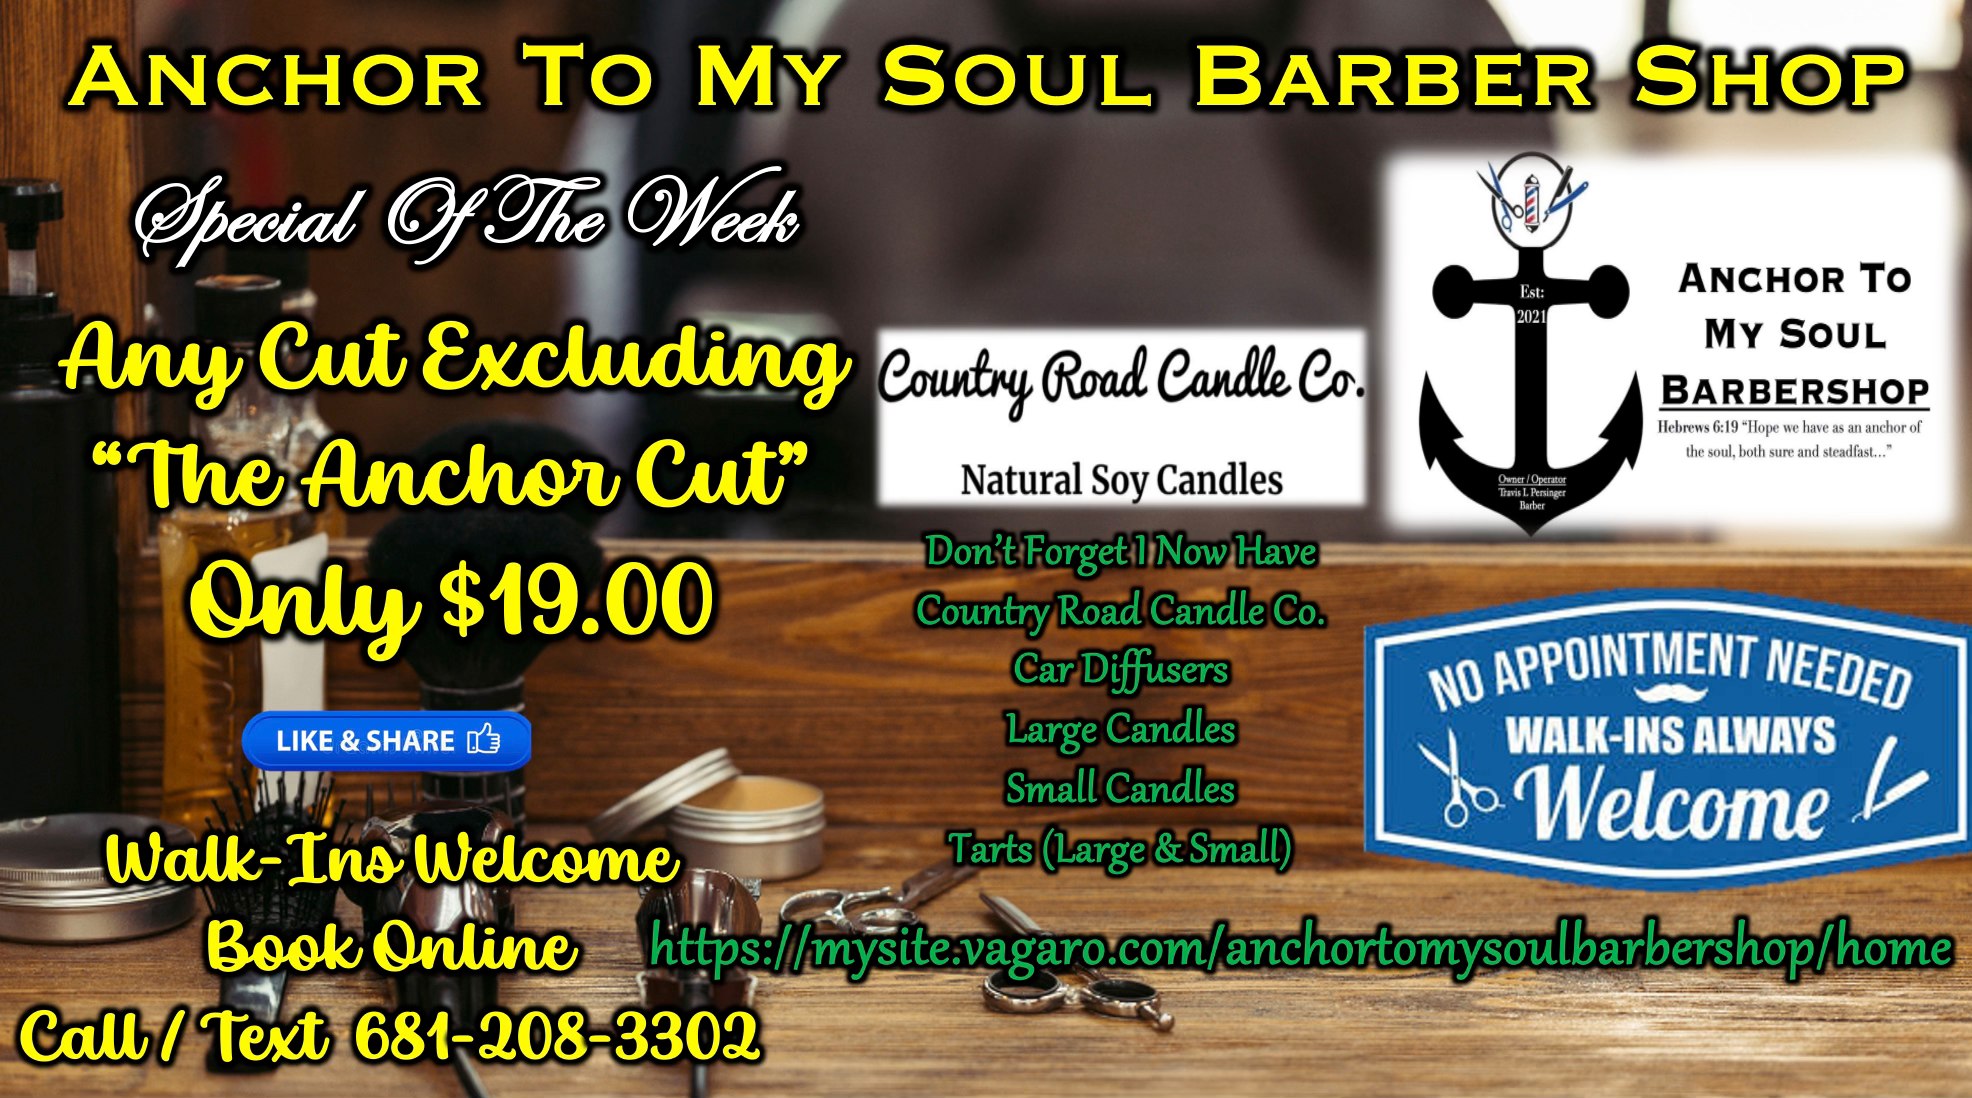 Anchor To My Soul Barber Shop 504 Court St, Summersville West Virginia 26651